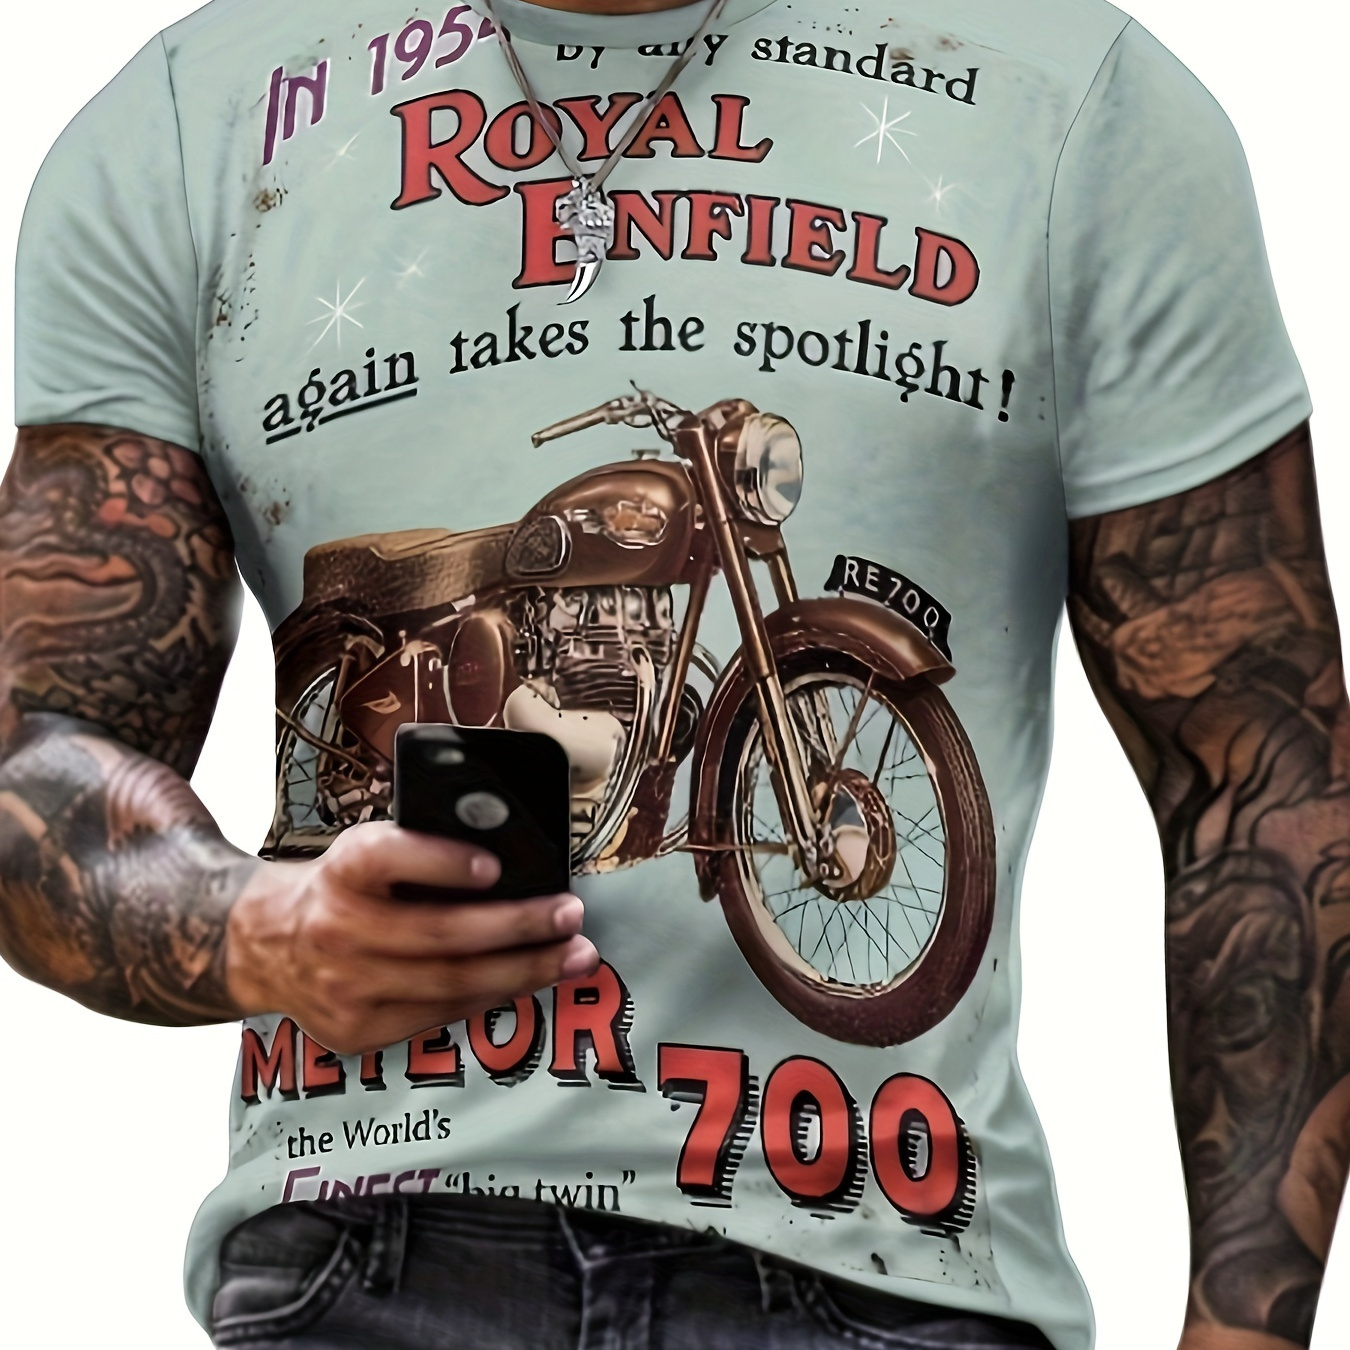 

Retro Motor Pattern 3d Digital Printed Crew Neck Short Sleeve T-shirt For Men, Casual Summer T-shirt For Daily Wear And Vacation Resorts